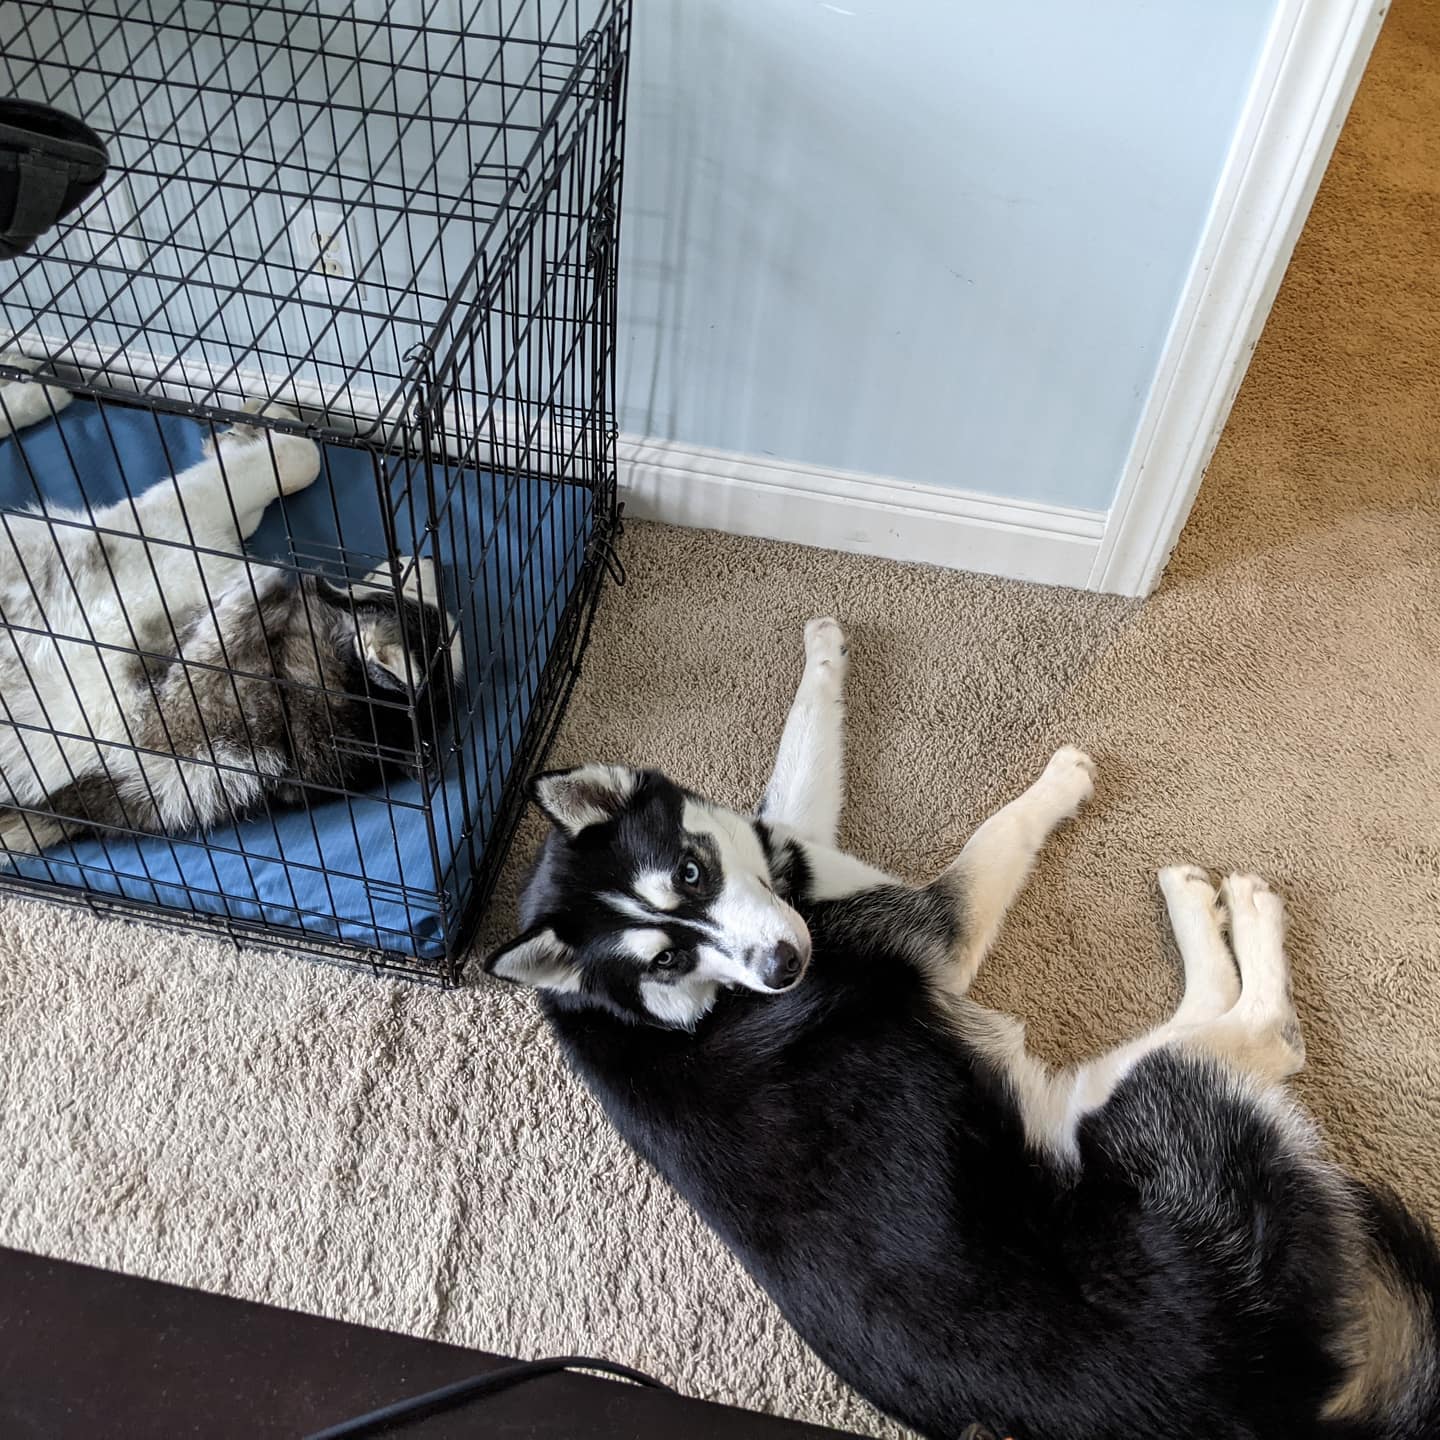 @stlloki was a bad boy this morning so is cooling his heels for a bit in his crate. #stlnanuq insists on keeping the jailbird company.I mean, it is cute LOL#siberianhusky #huskiesofinstagram